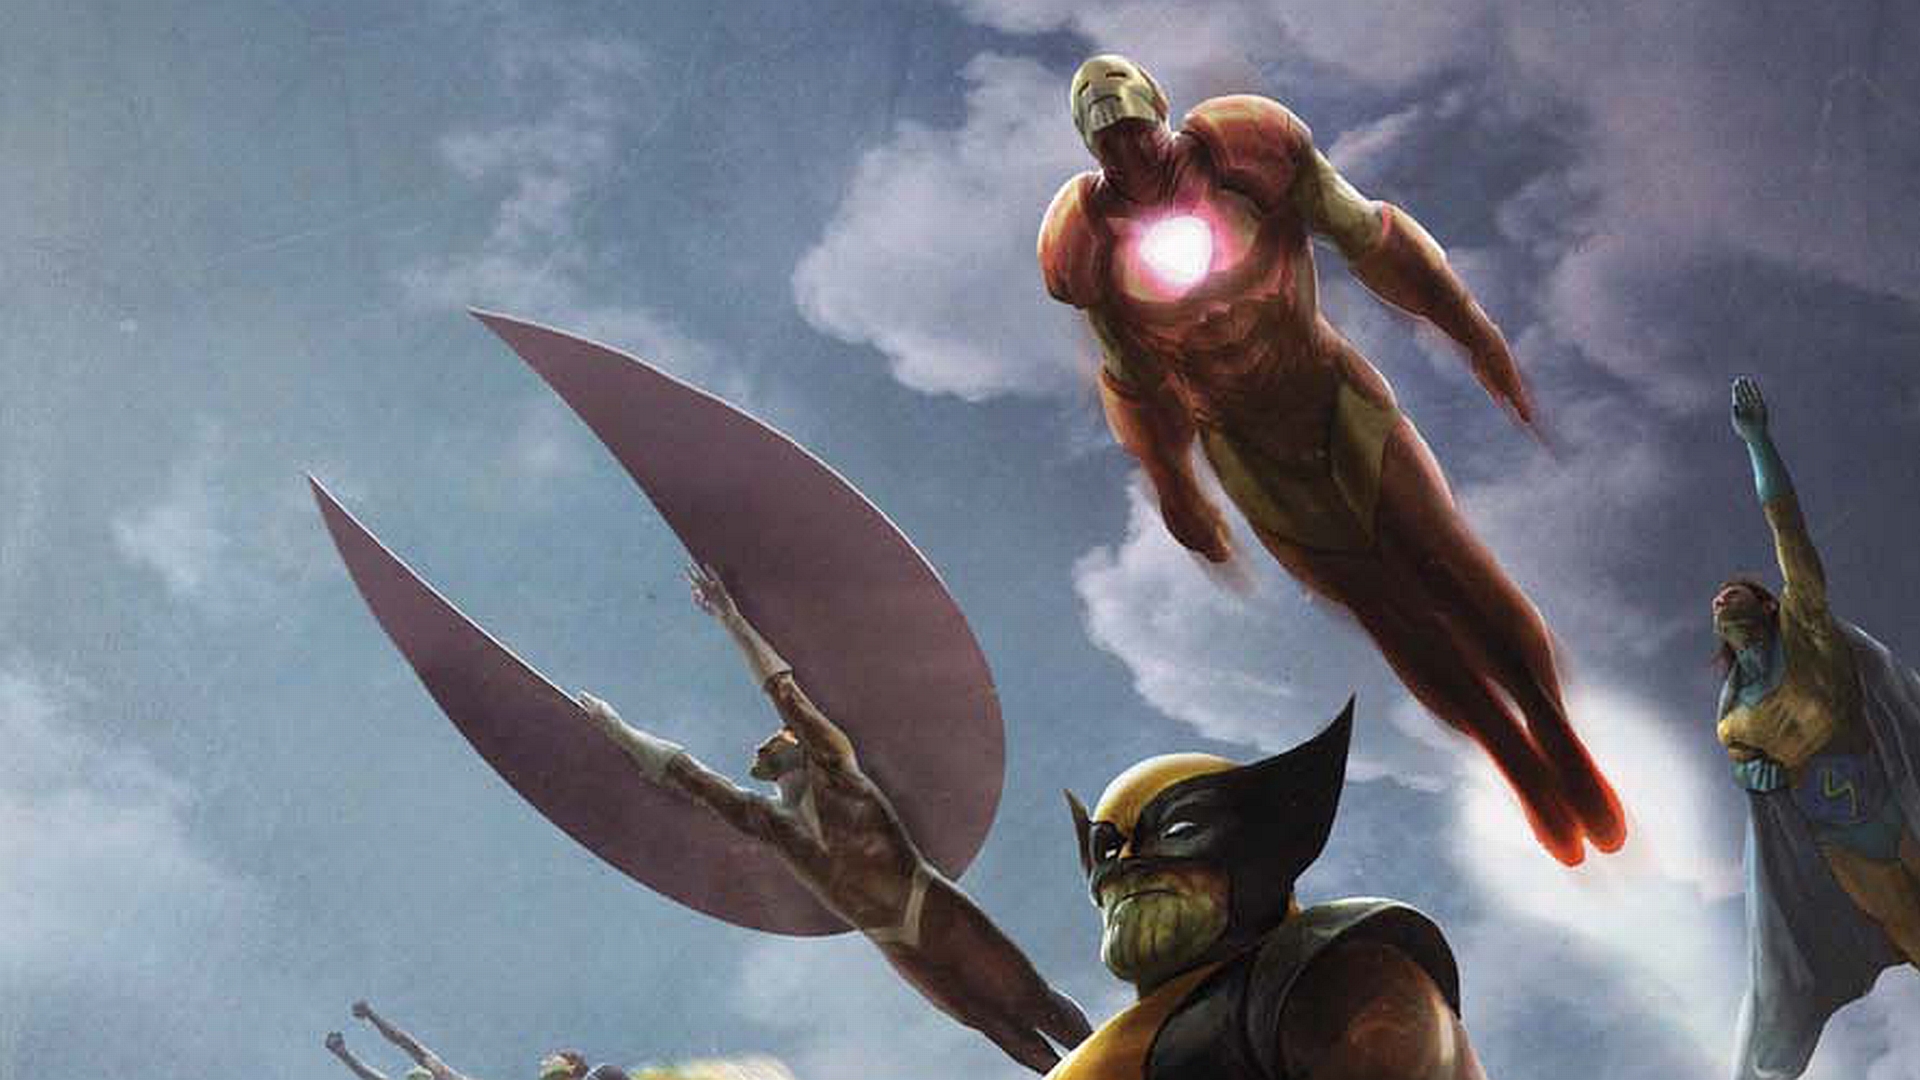 A mighty team of heroes, including Iron Man, Wolverine, Skrull, Sentry, and Falcon, stand ready to defend.